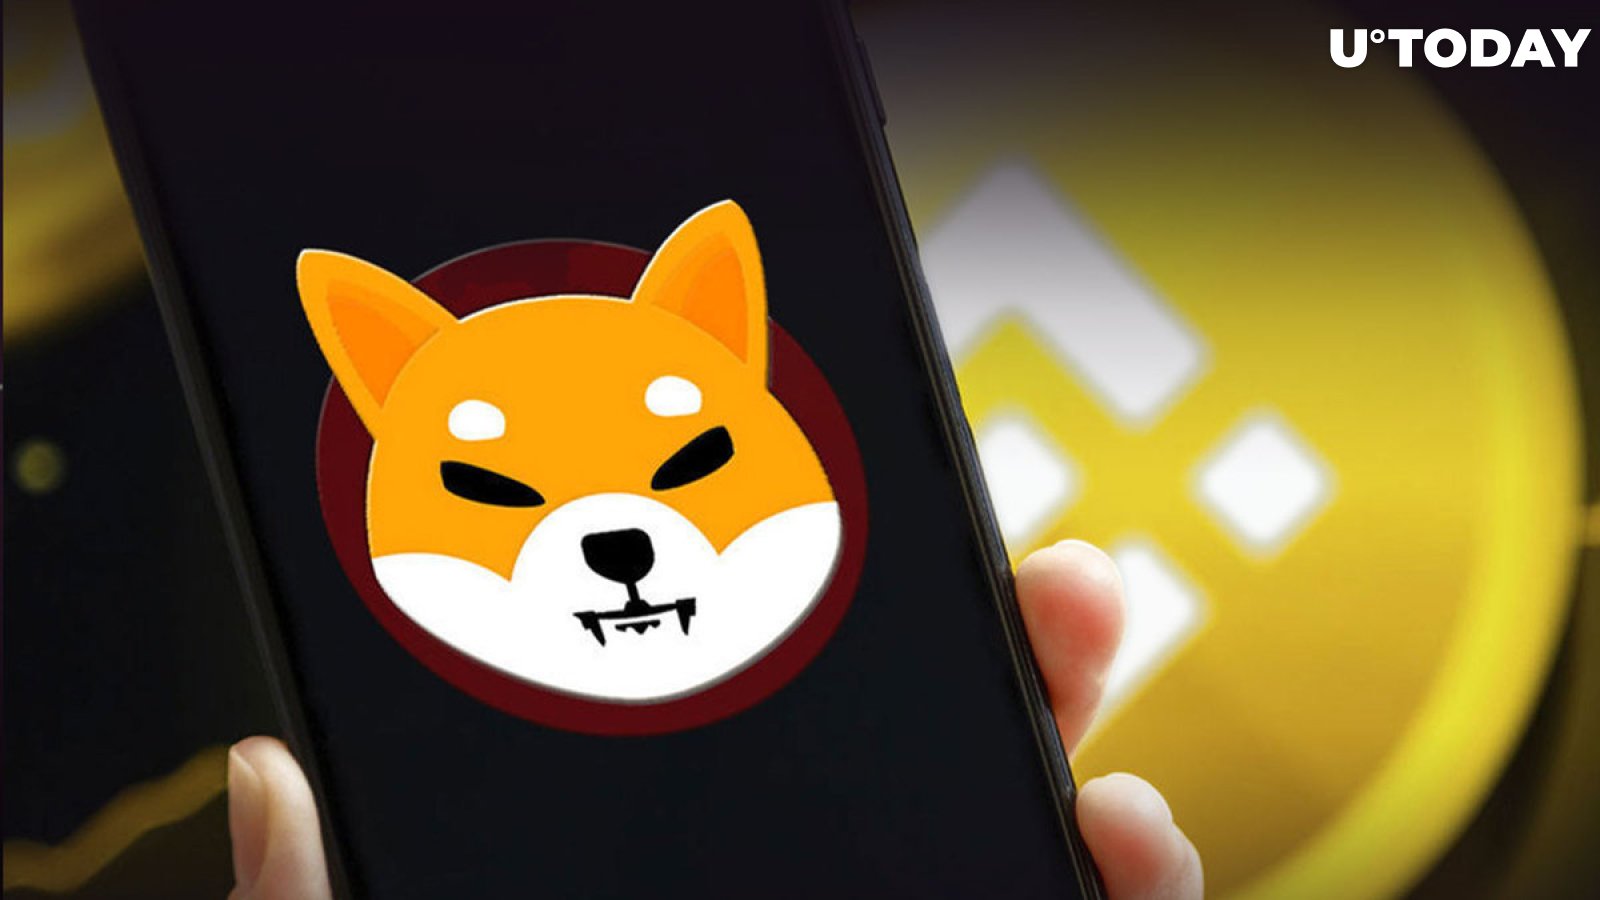 Tens of Billions of SHIB Sent to and From Binance as Shiba Inu Price Drops Overnight